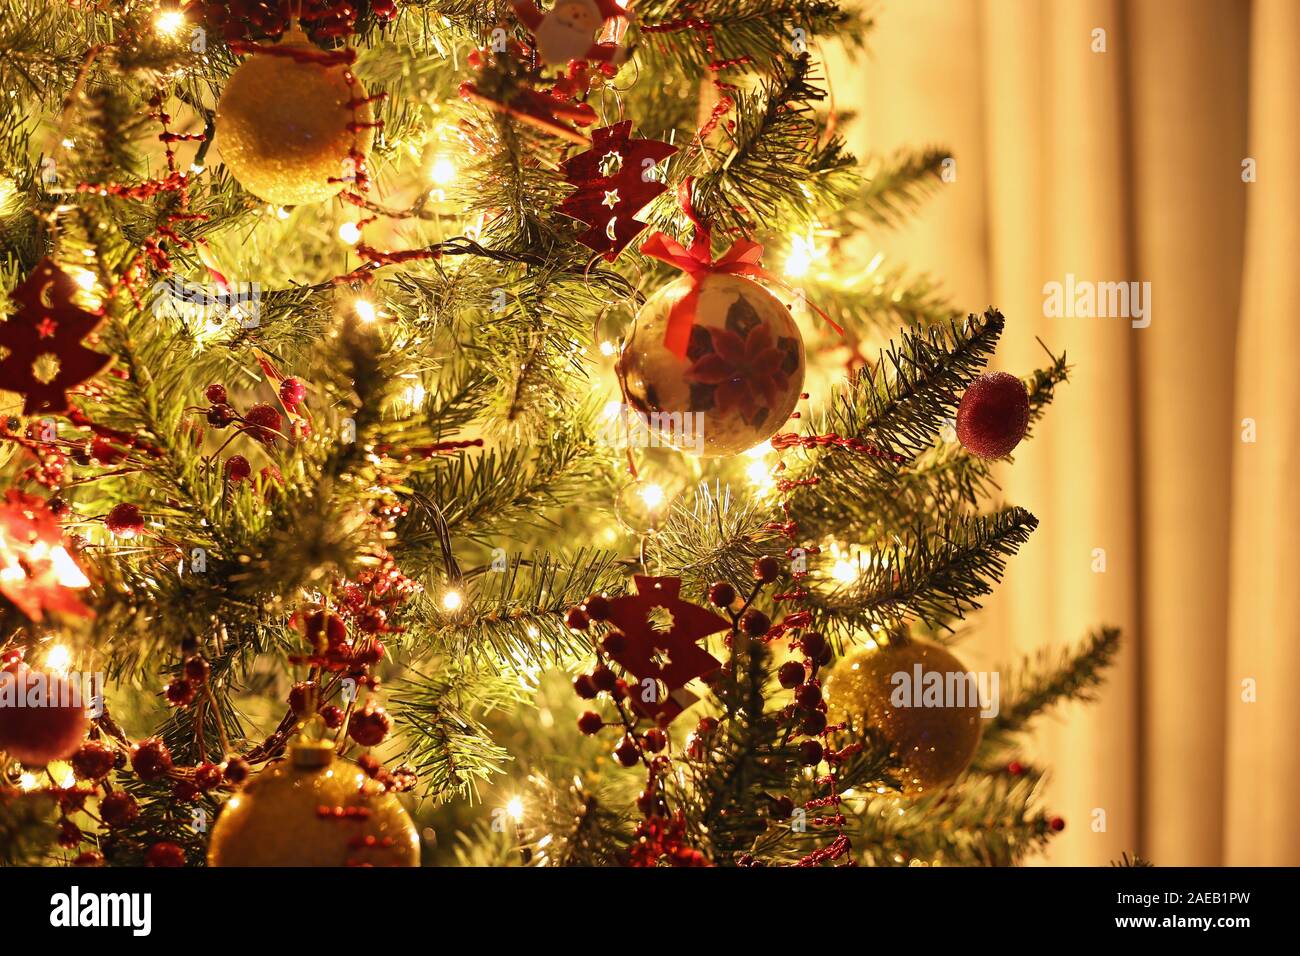 night home scene with Christmas tree and ornaments Stock Photo